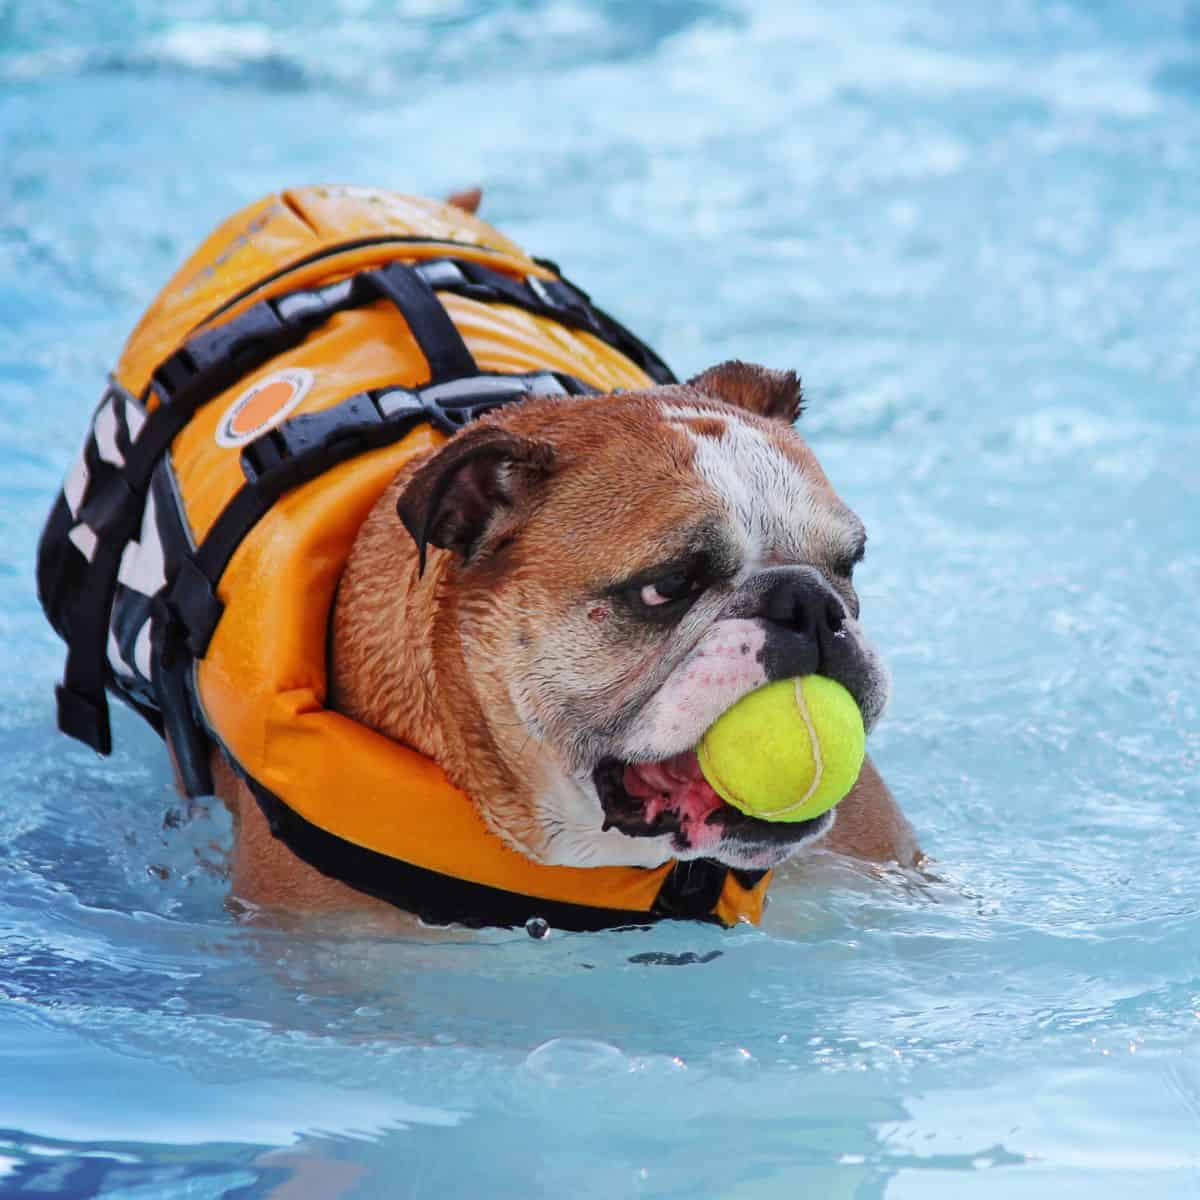 Bull dog swimming in a pool with a life vest and a ball in his mouth.